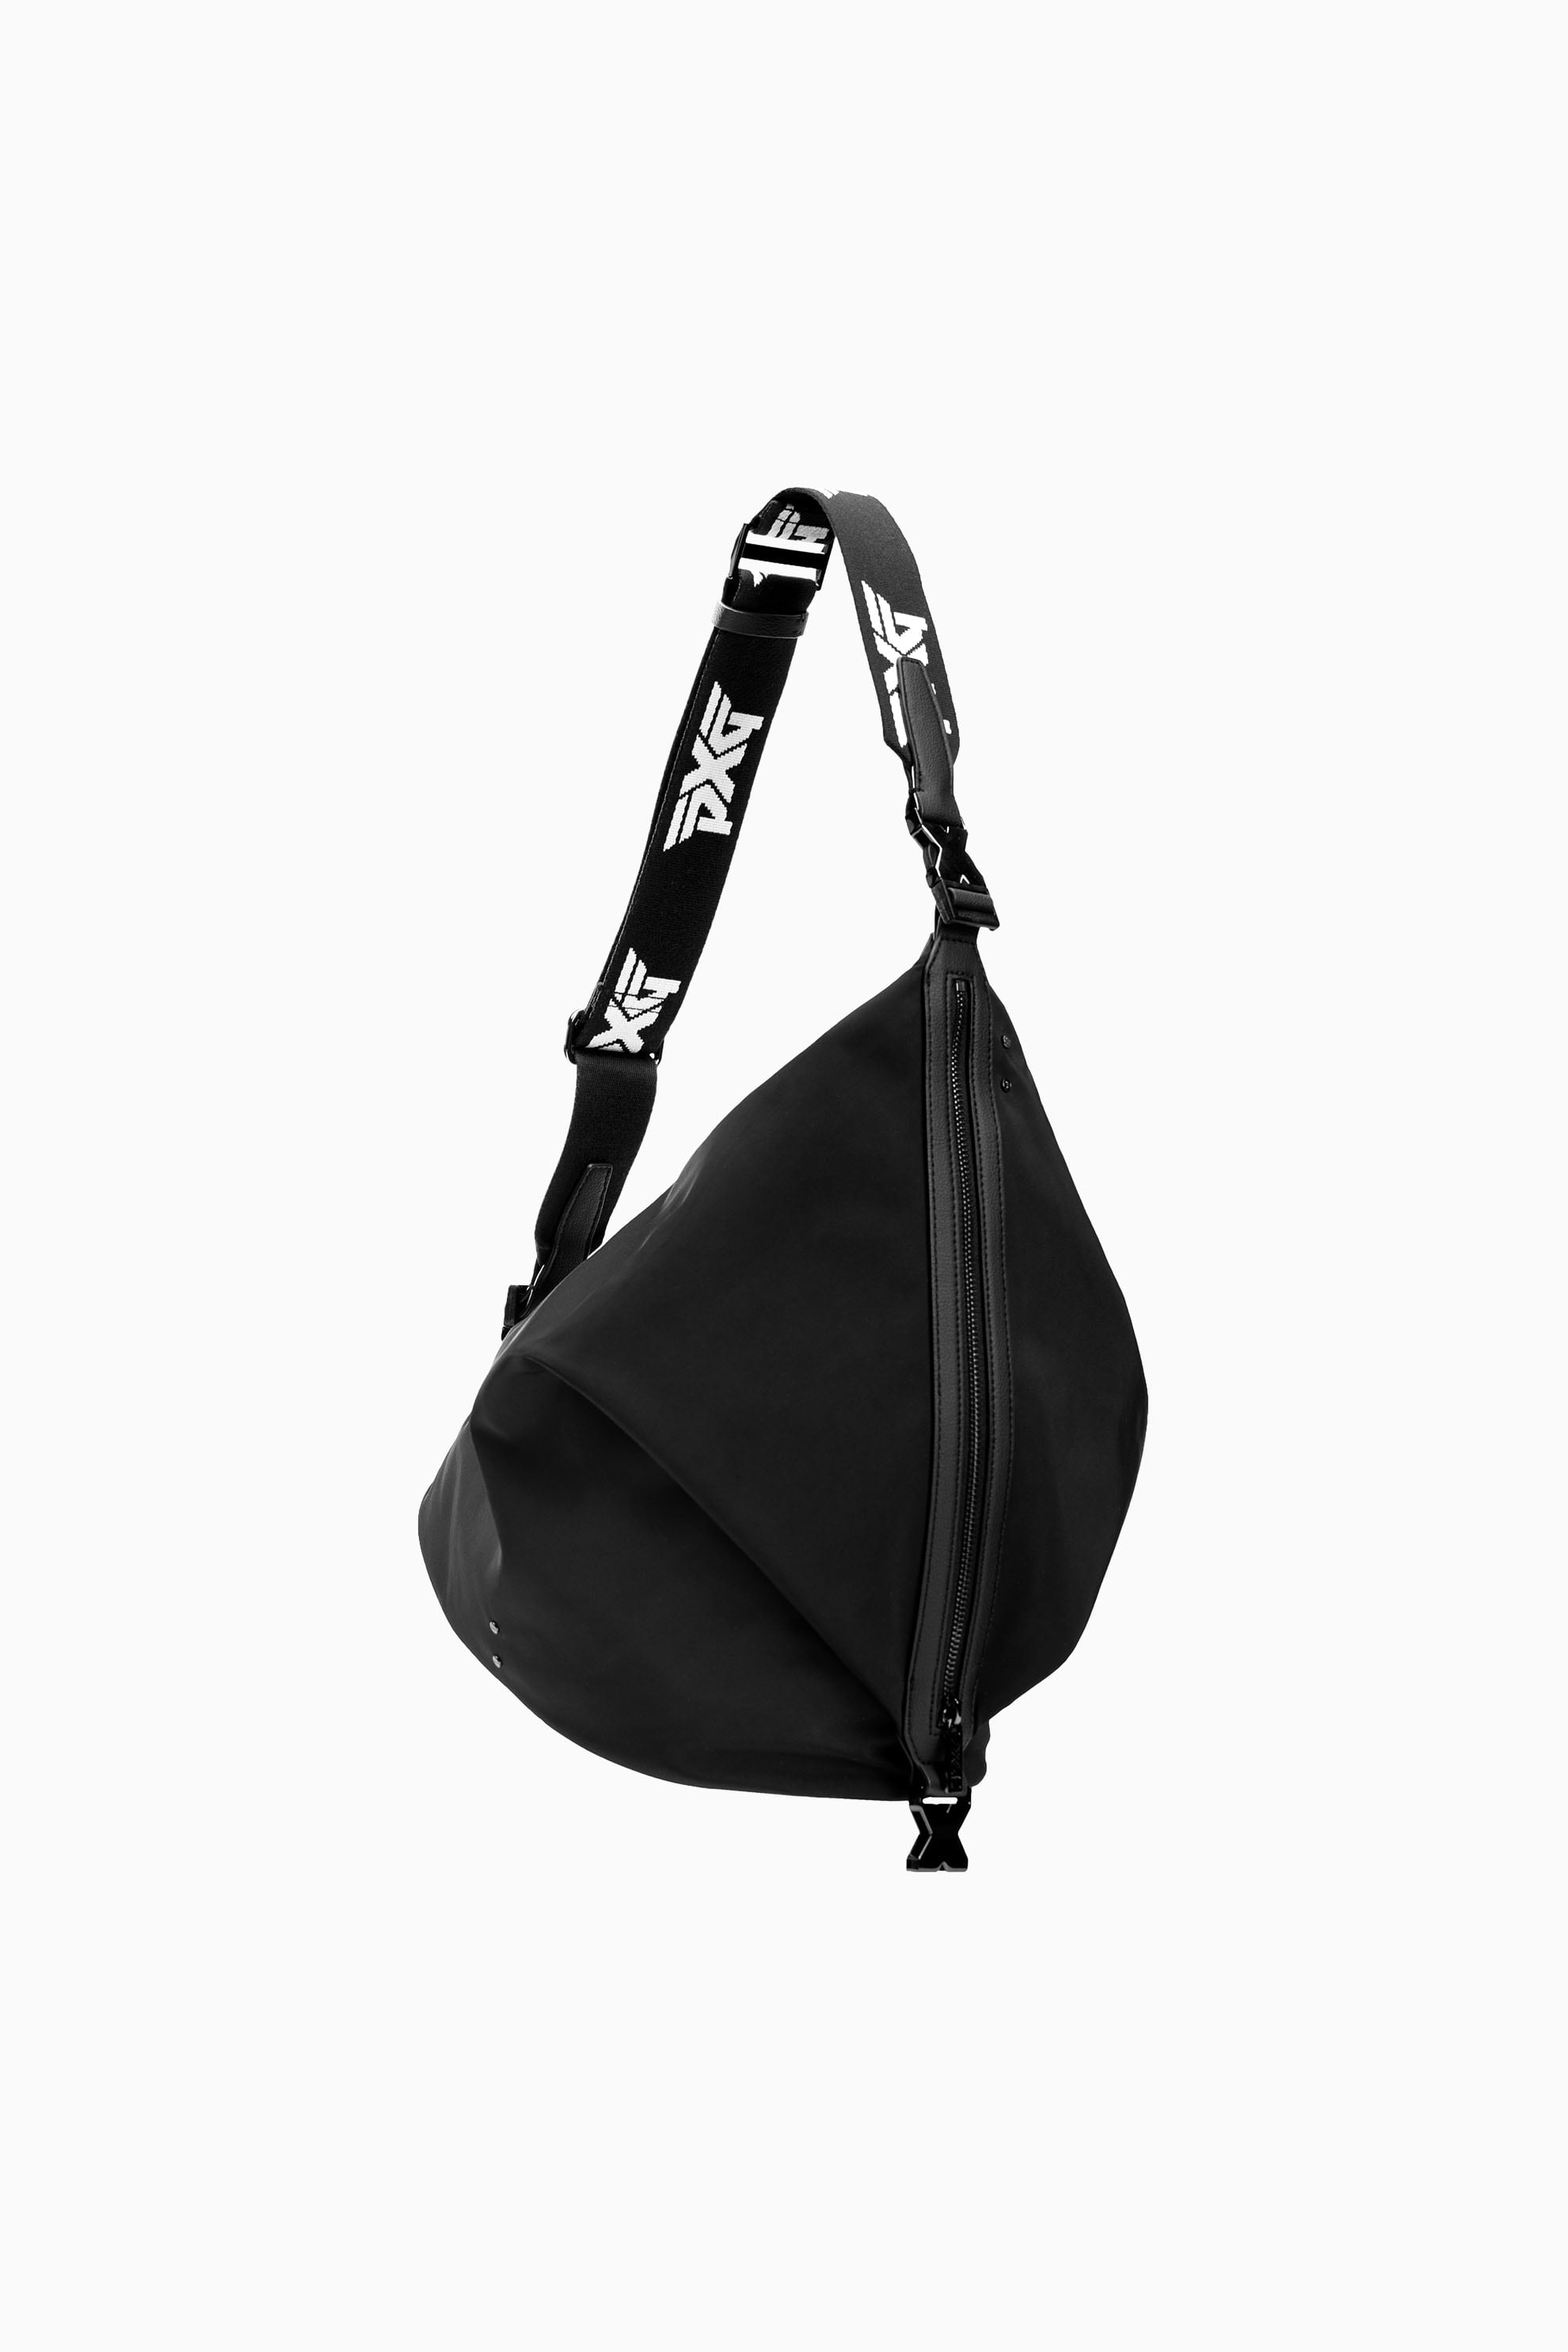 17 Best Sling Bags to Wear on Hikes to the Beach  Everywhere Else   Condé Nast Traveler